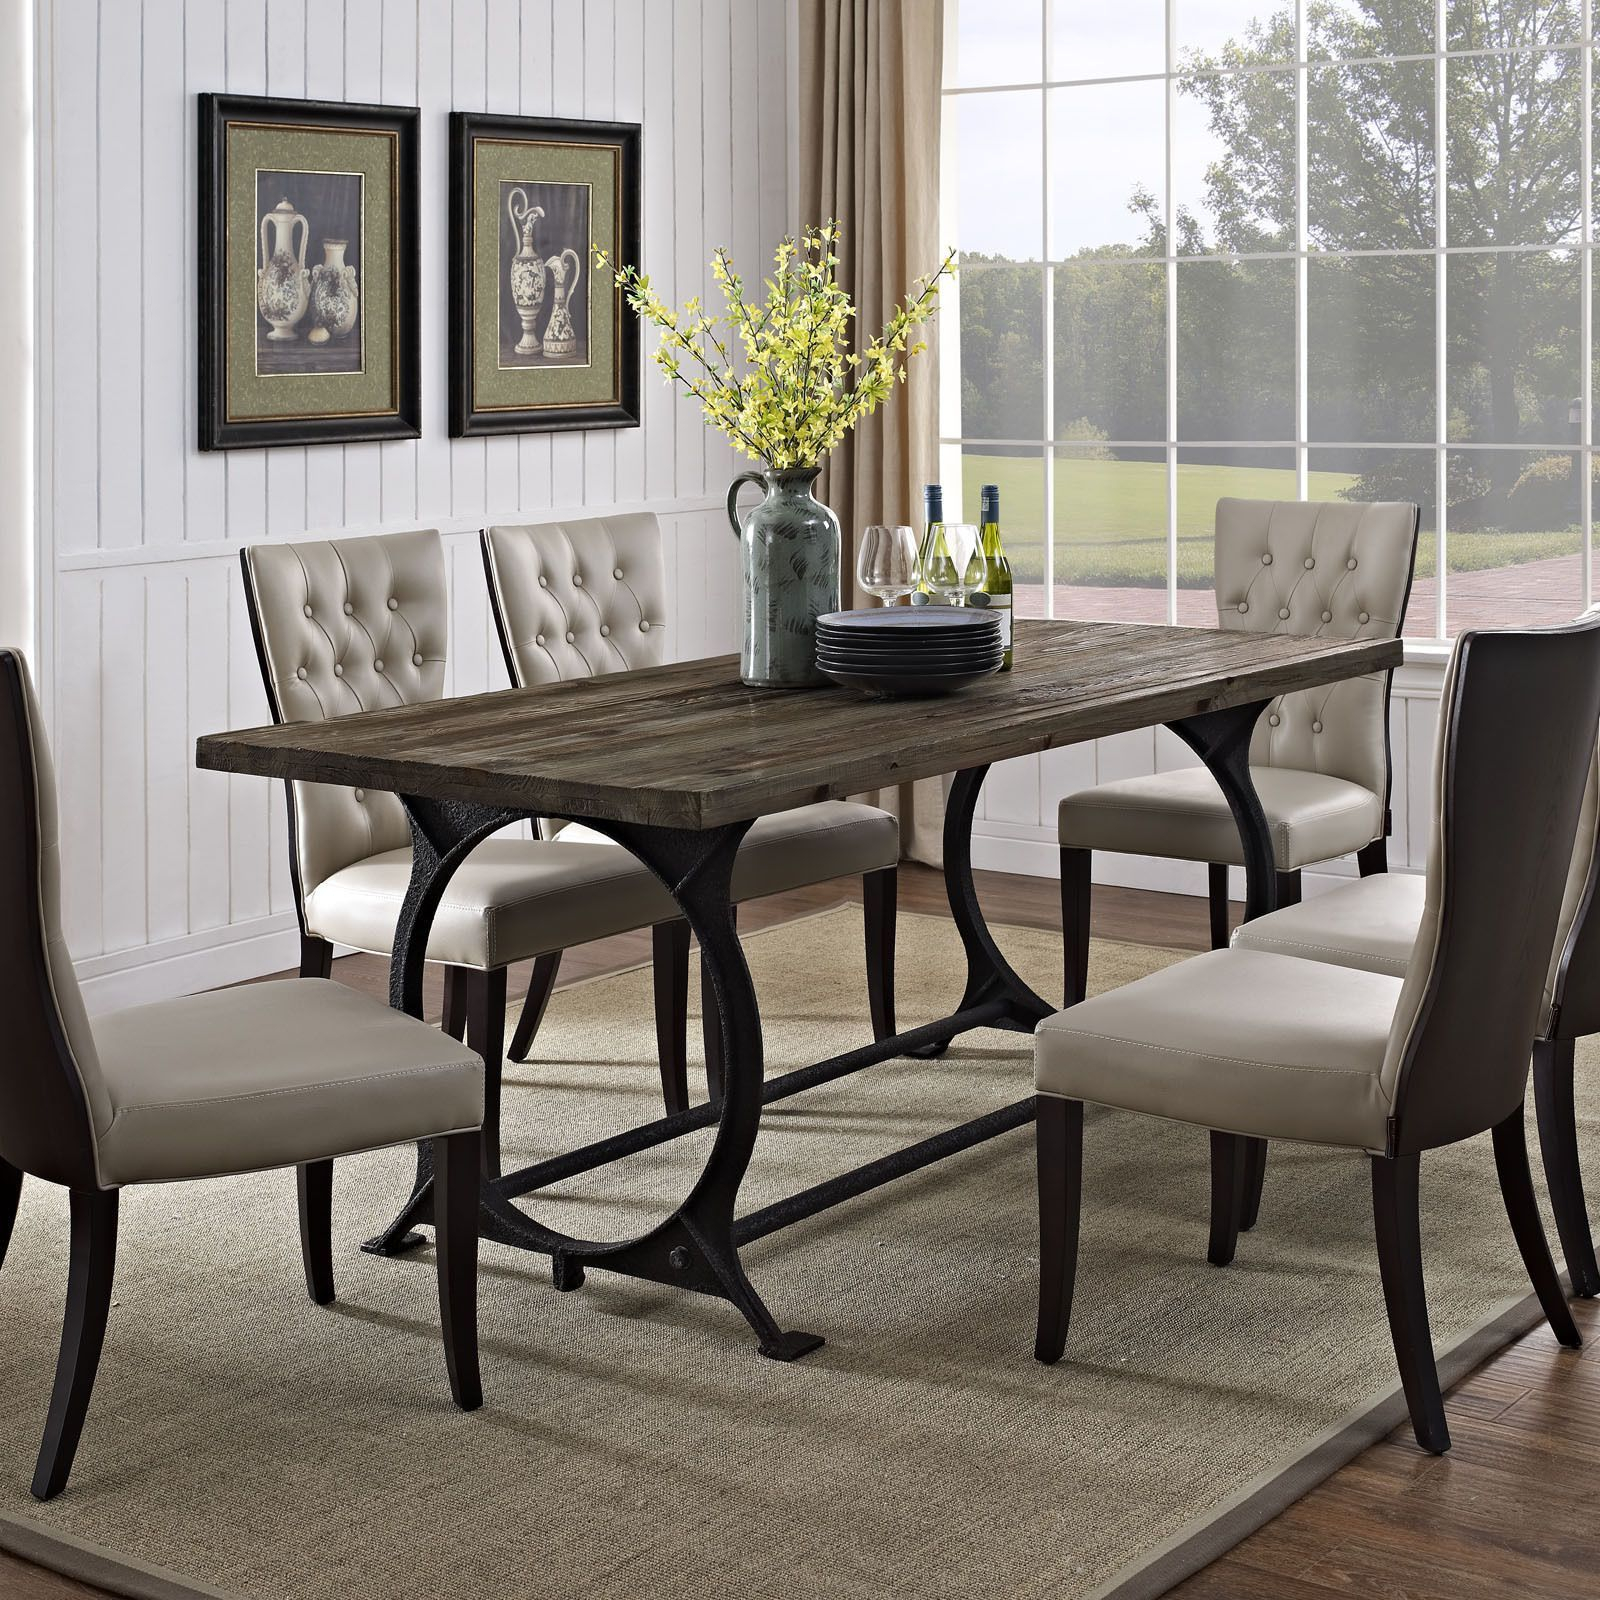 Effuse Wood Top Dining Table Brown In 2019 Dining Room regarding sizing 1600 X 1600